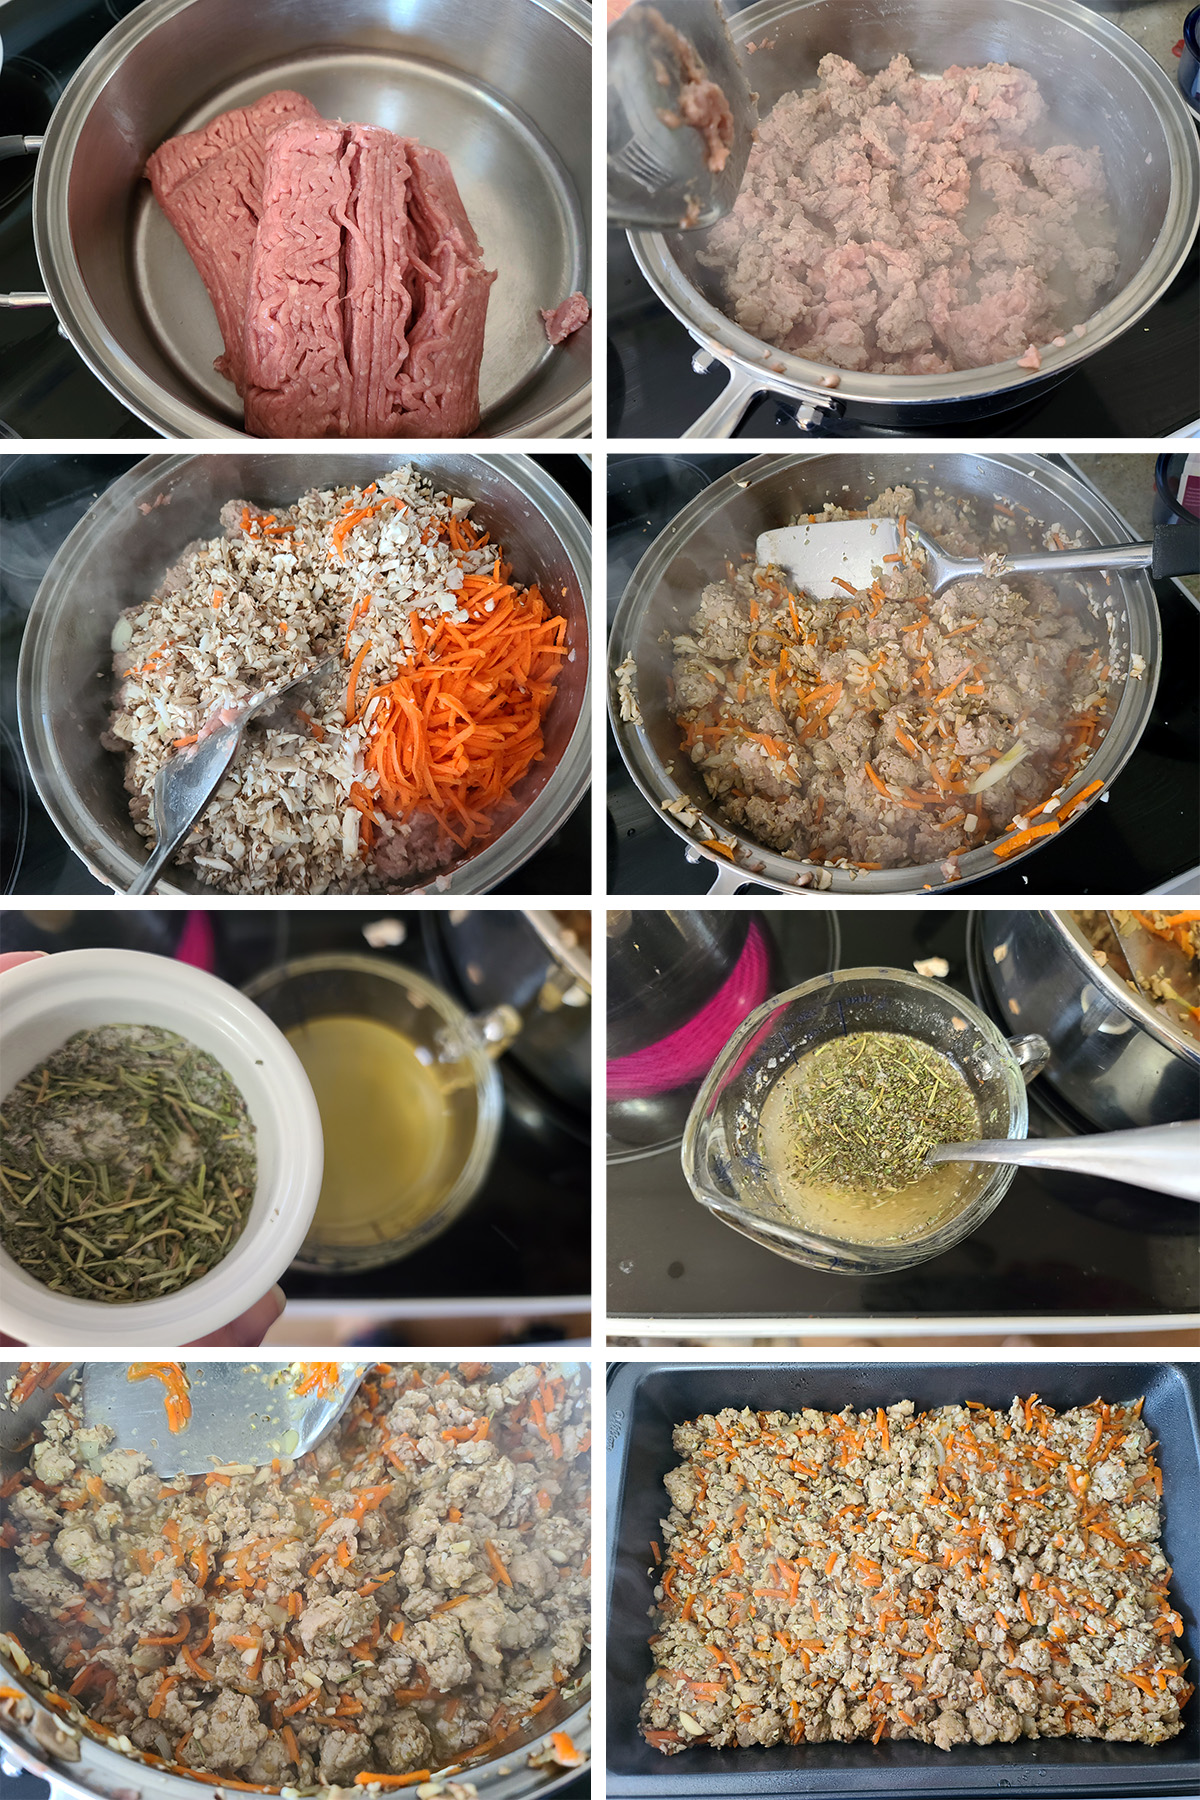 An 8 part image showing the stages of the filling being made and spread in the pan, as described.